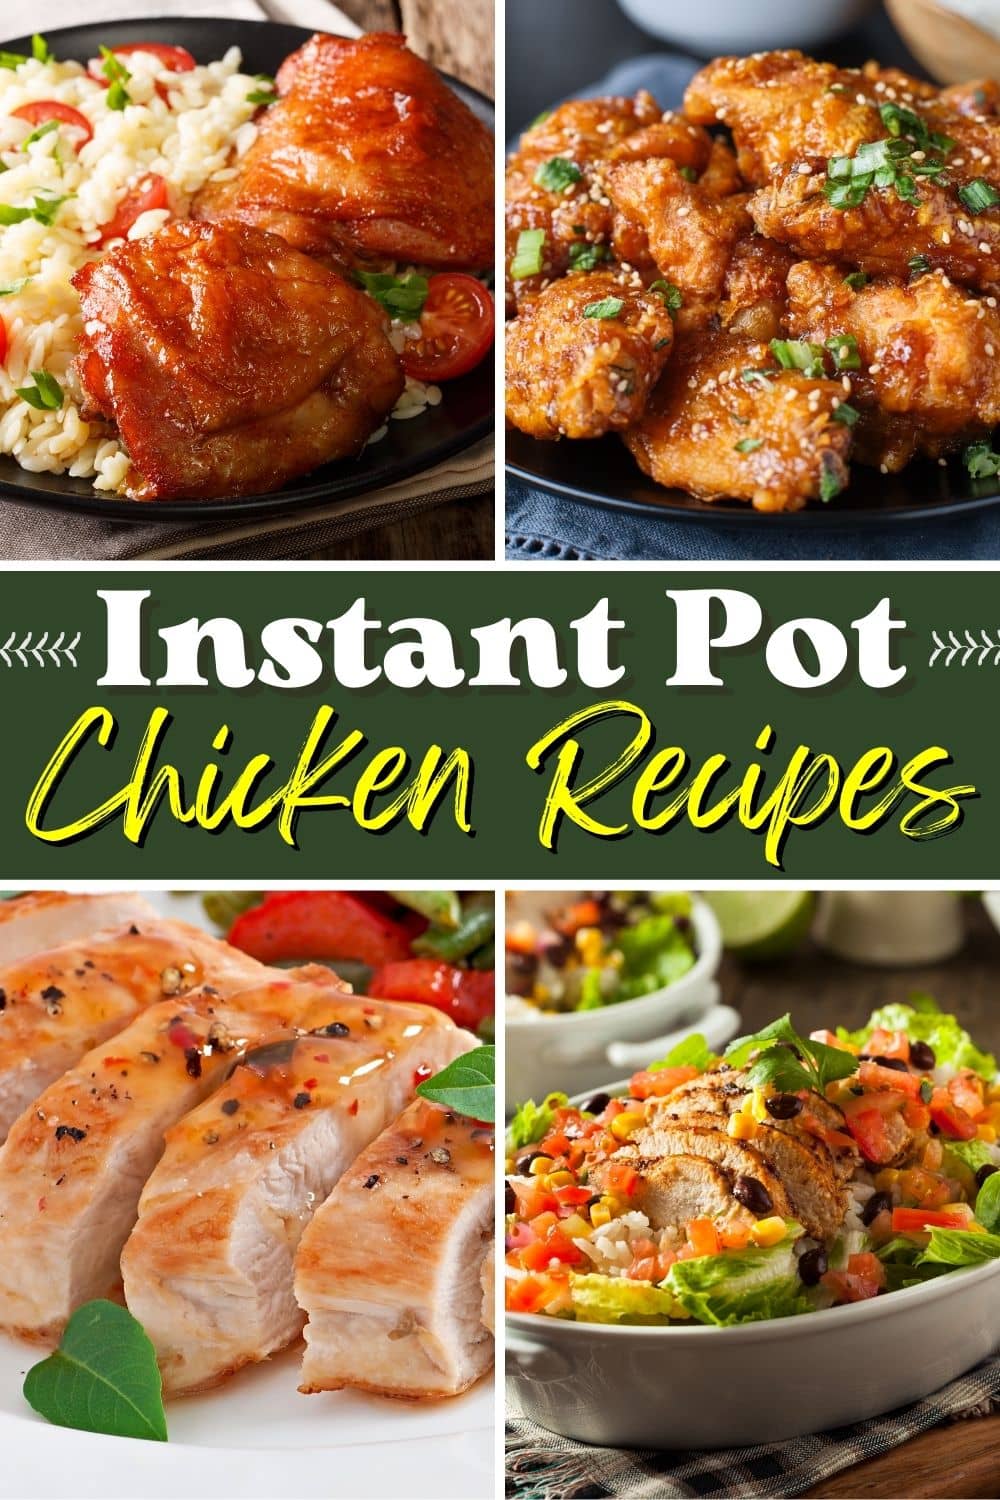 30 Simple Instant Pot Chicken Recipes - Insanely Good